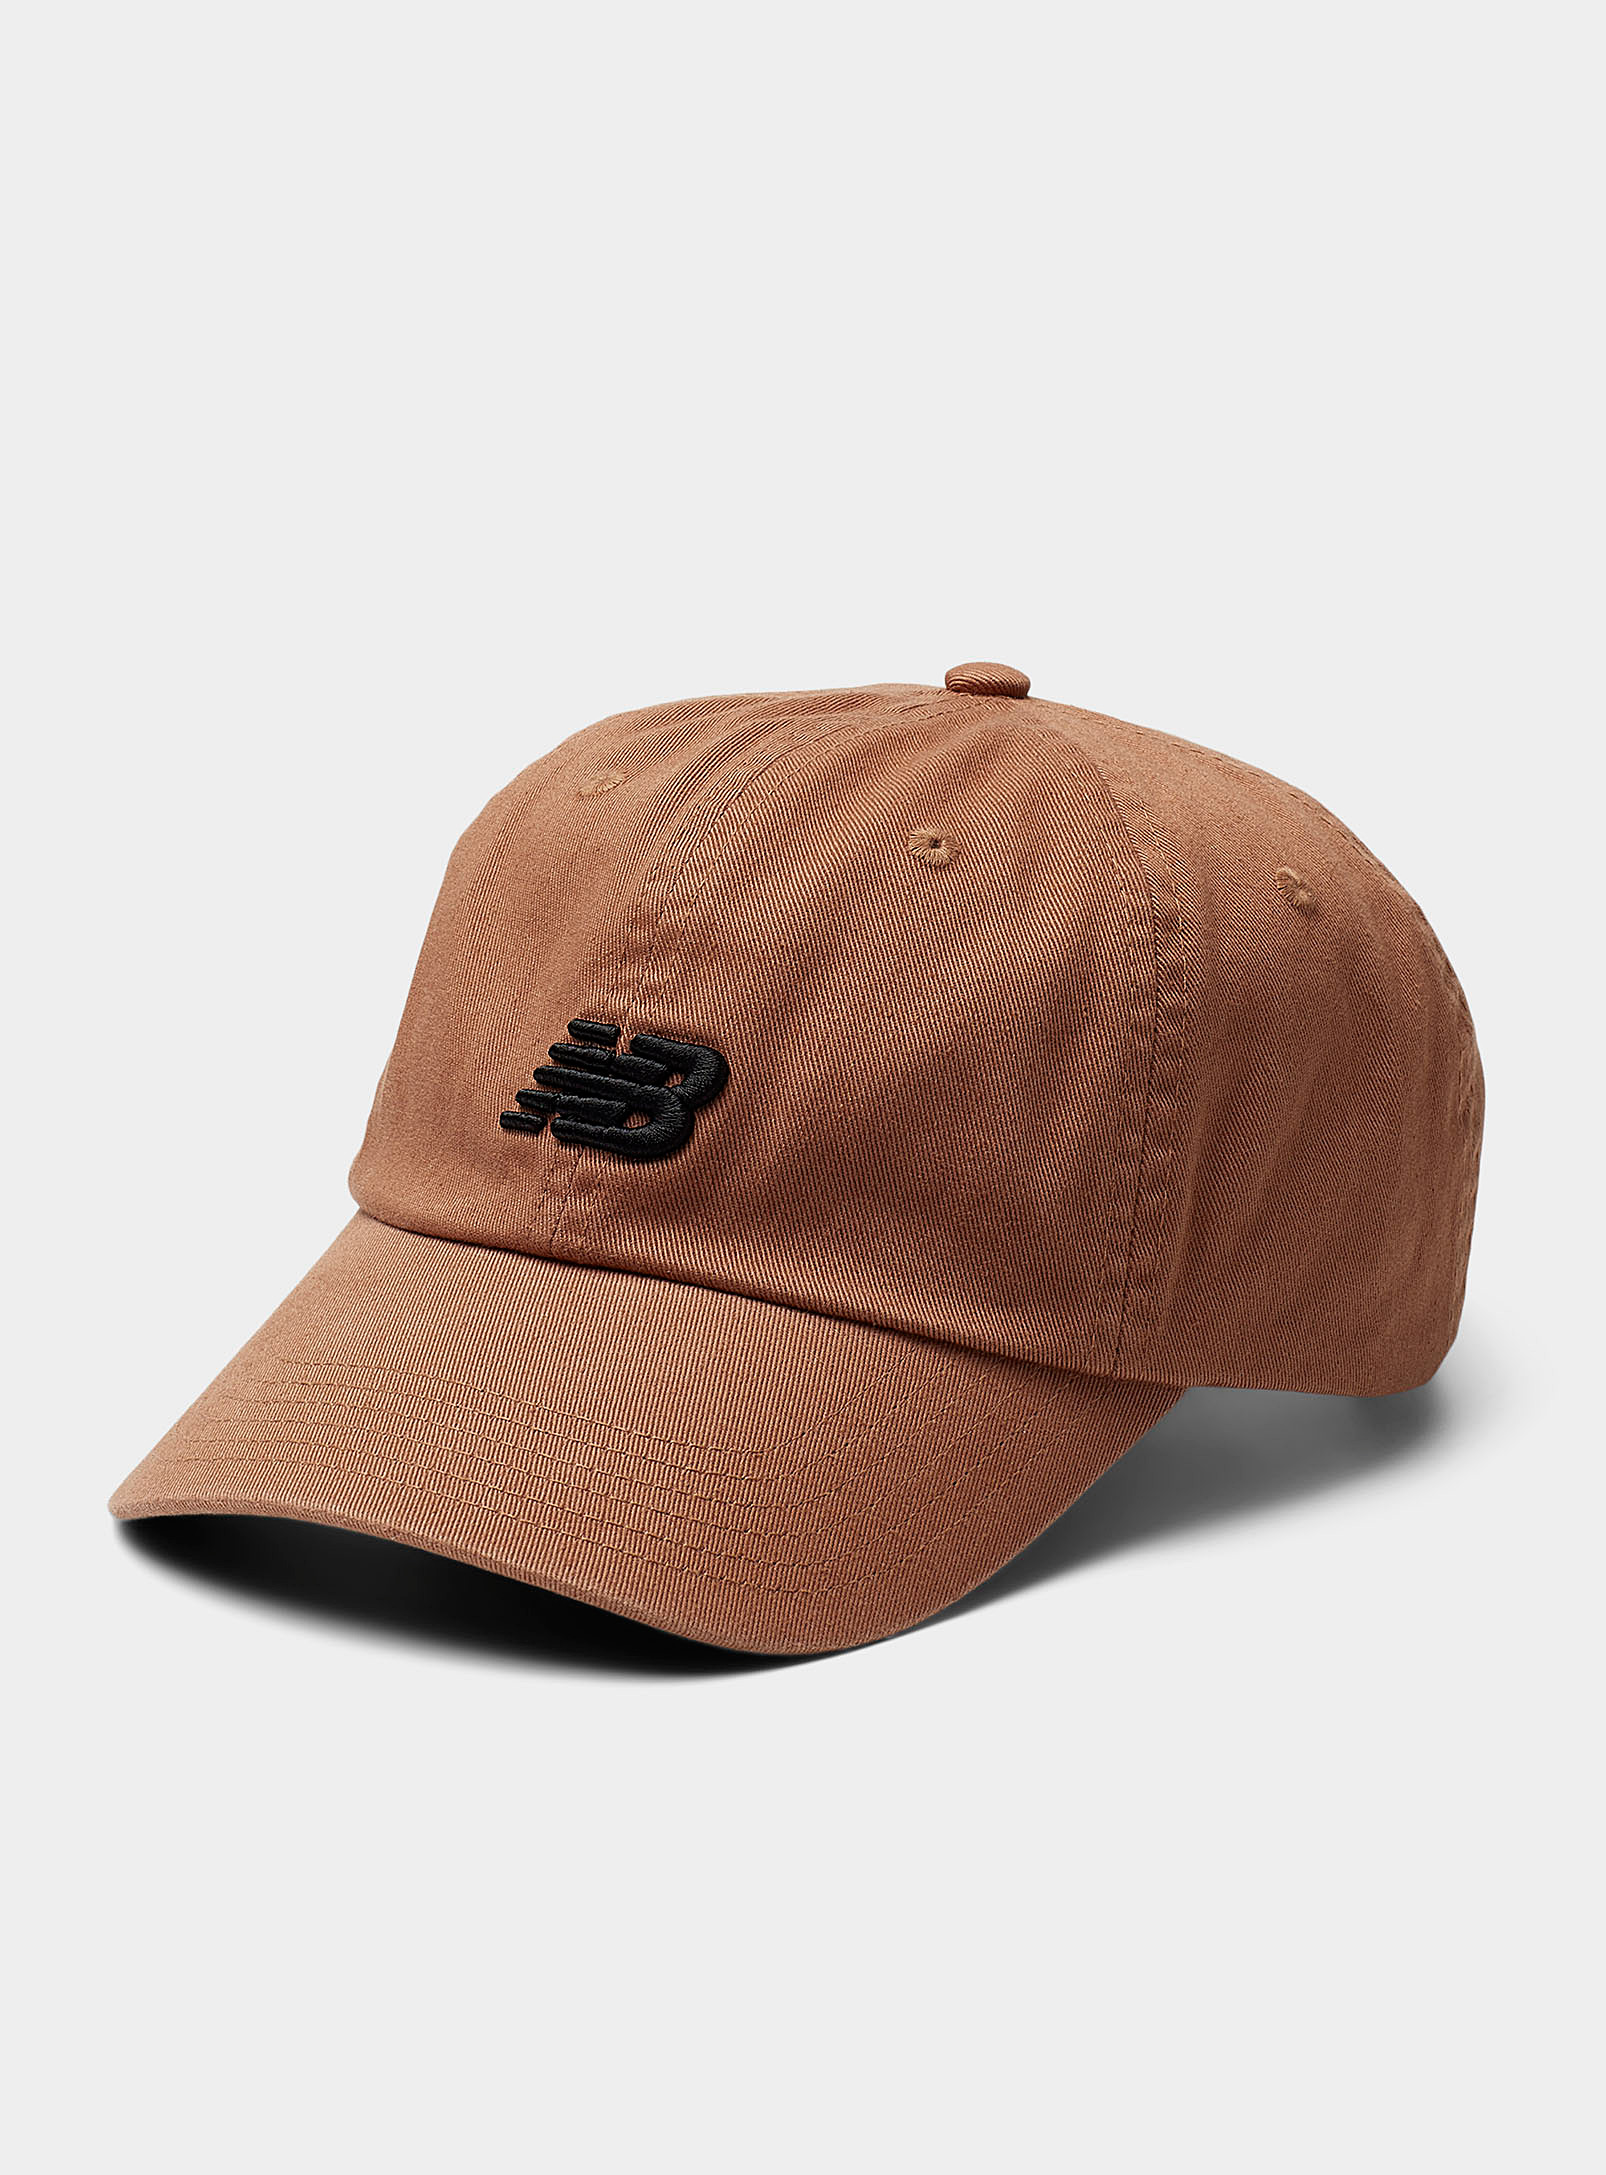 New Balance Embroidered-logo Dad Cap In Brown